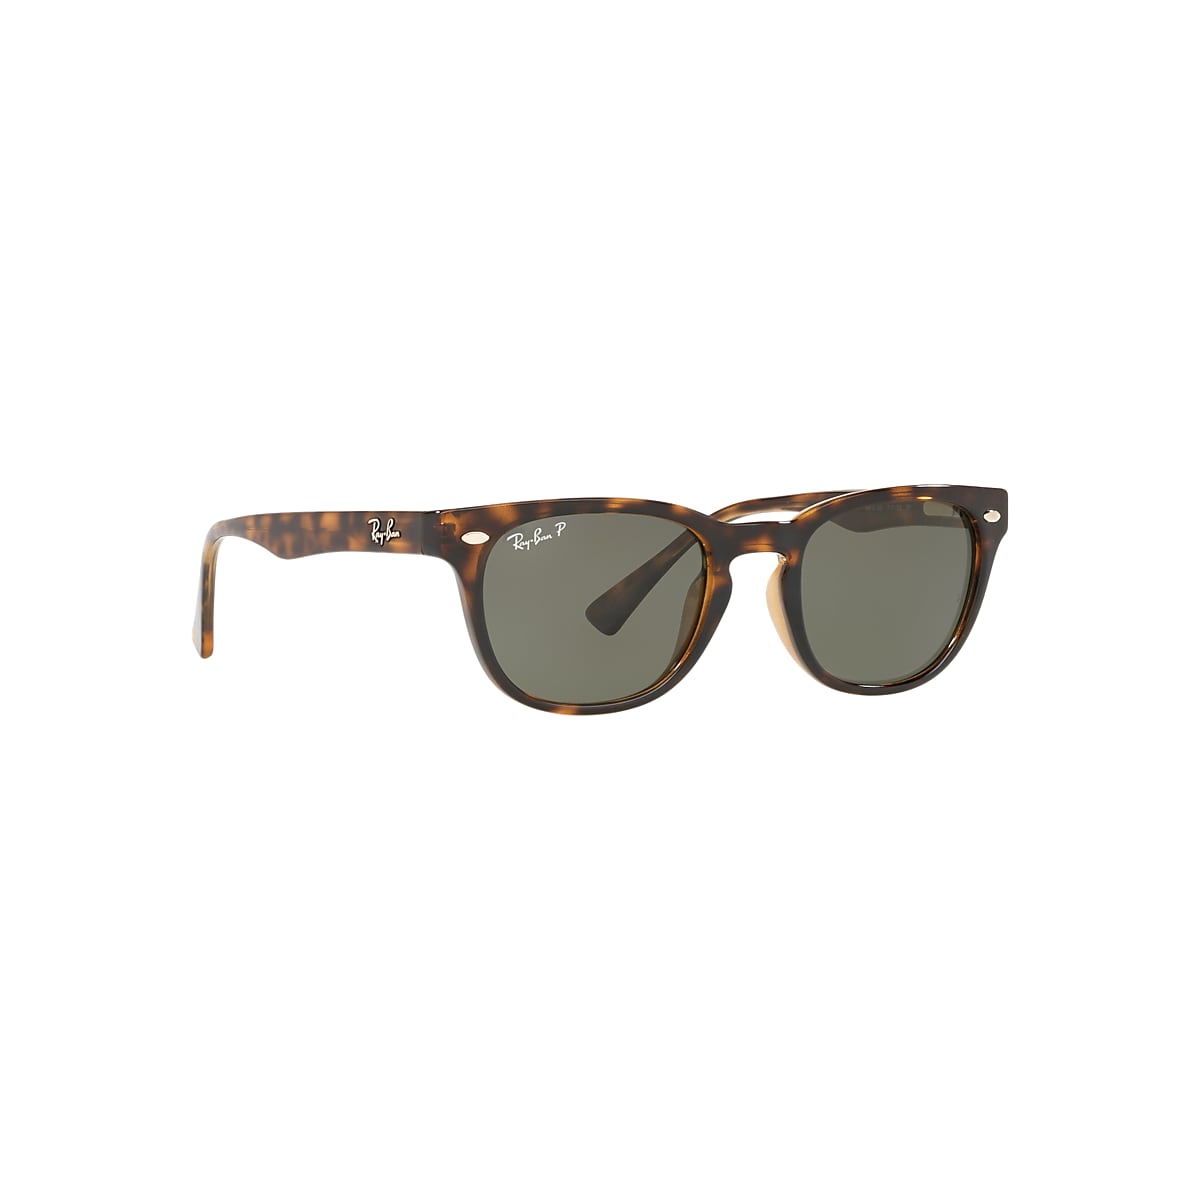 Rb4140 Sunglasses in Light Havana and Green | Ray-Ban®